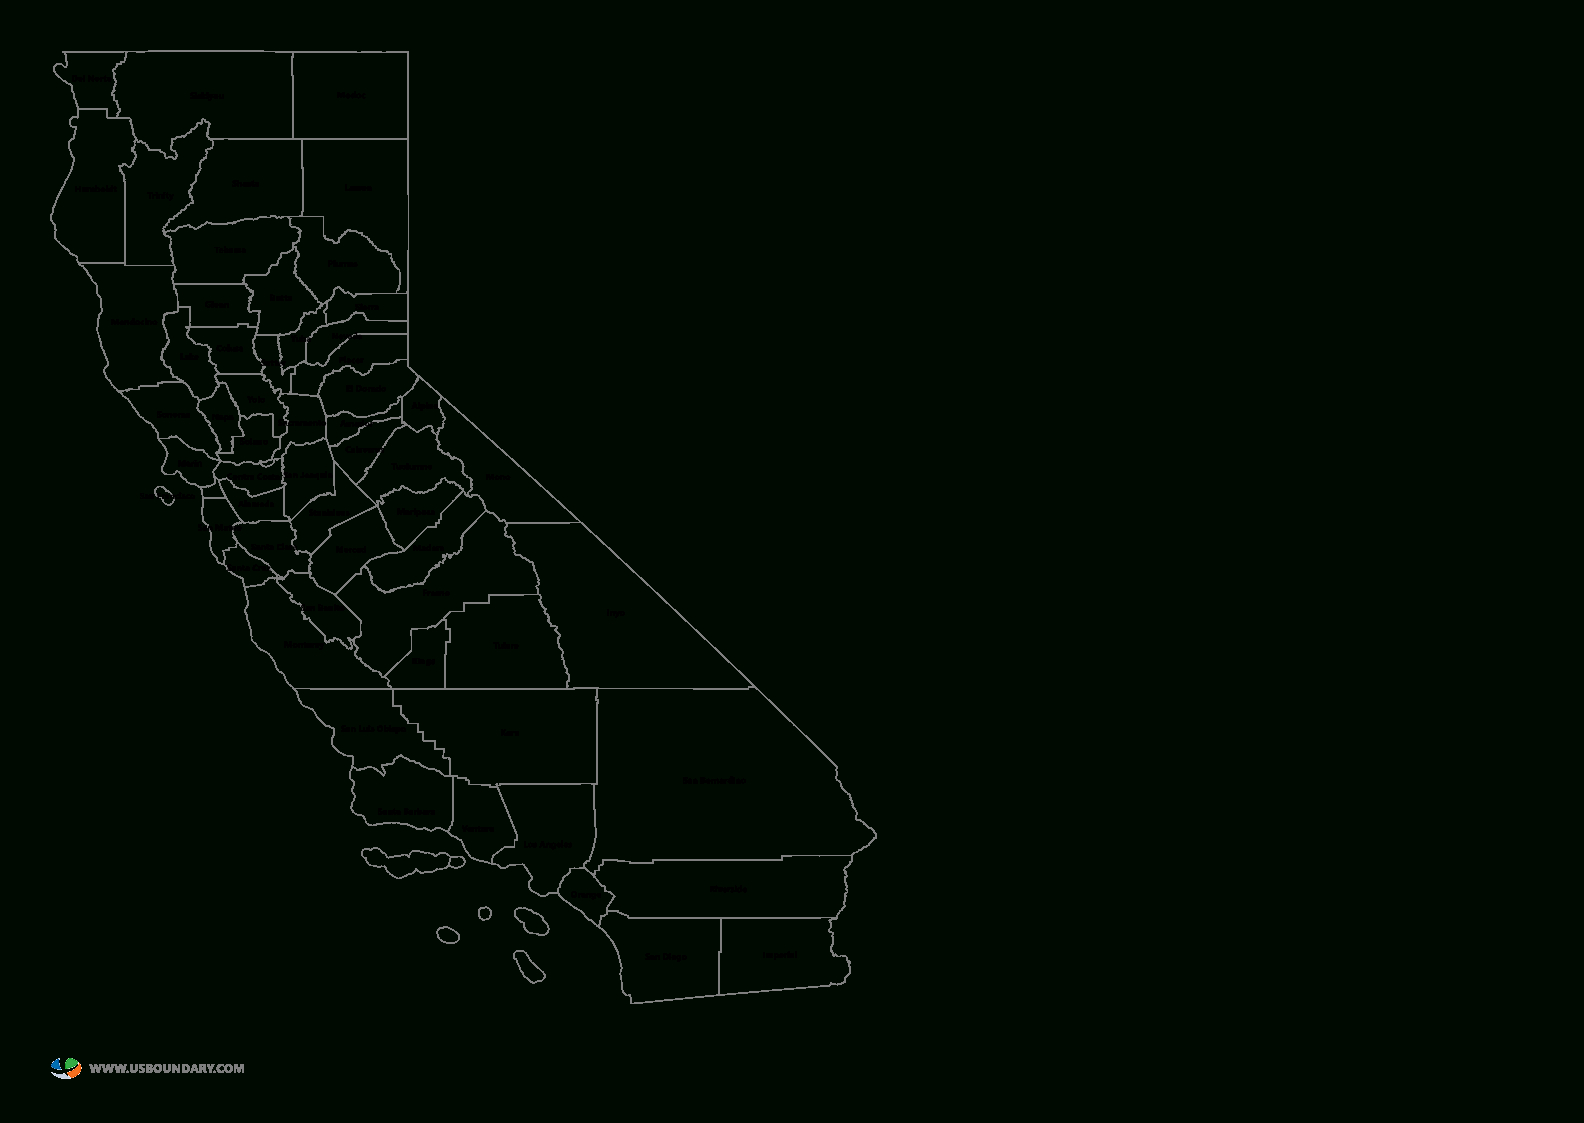 State Counties Maps Download - Free Editable Map Of California Counties